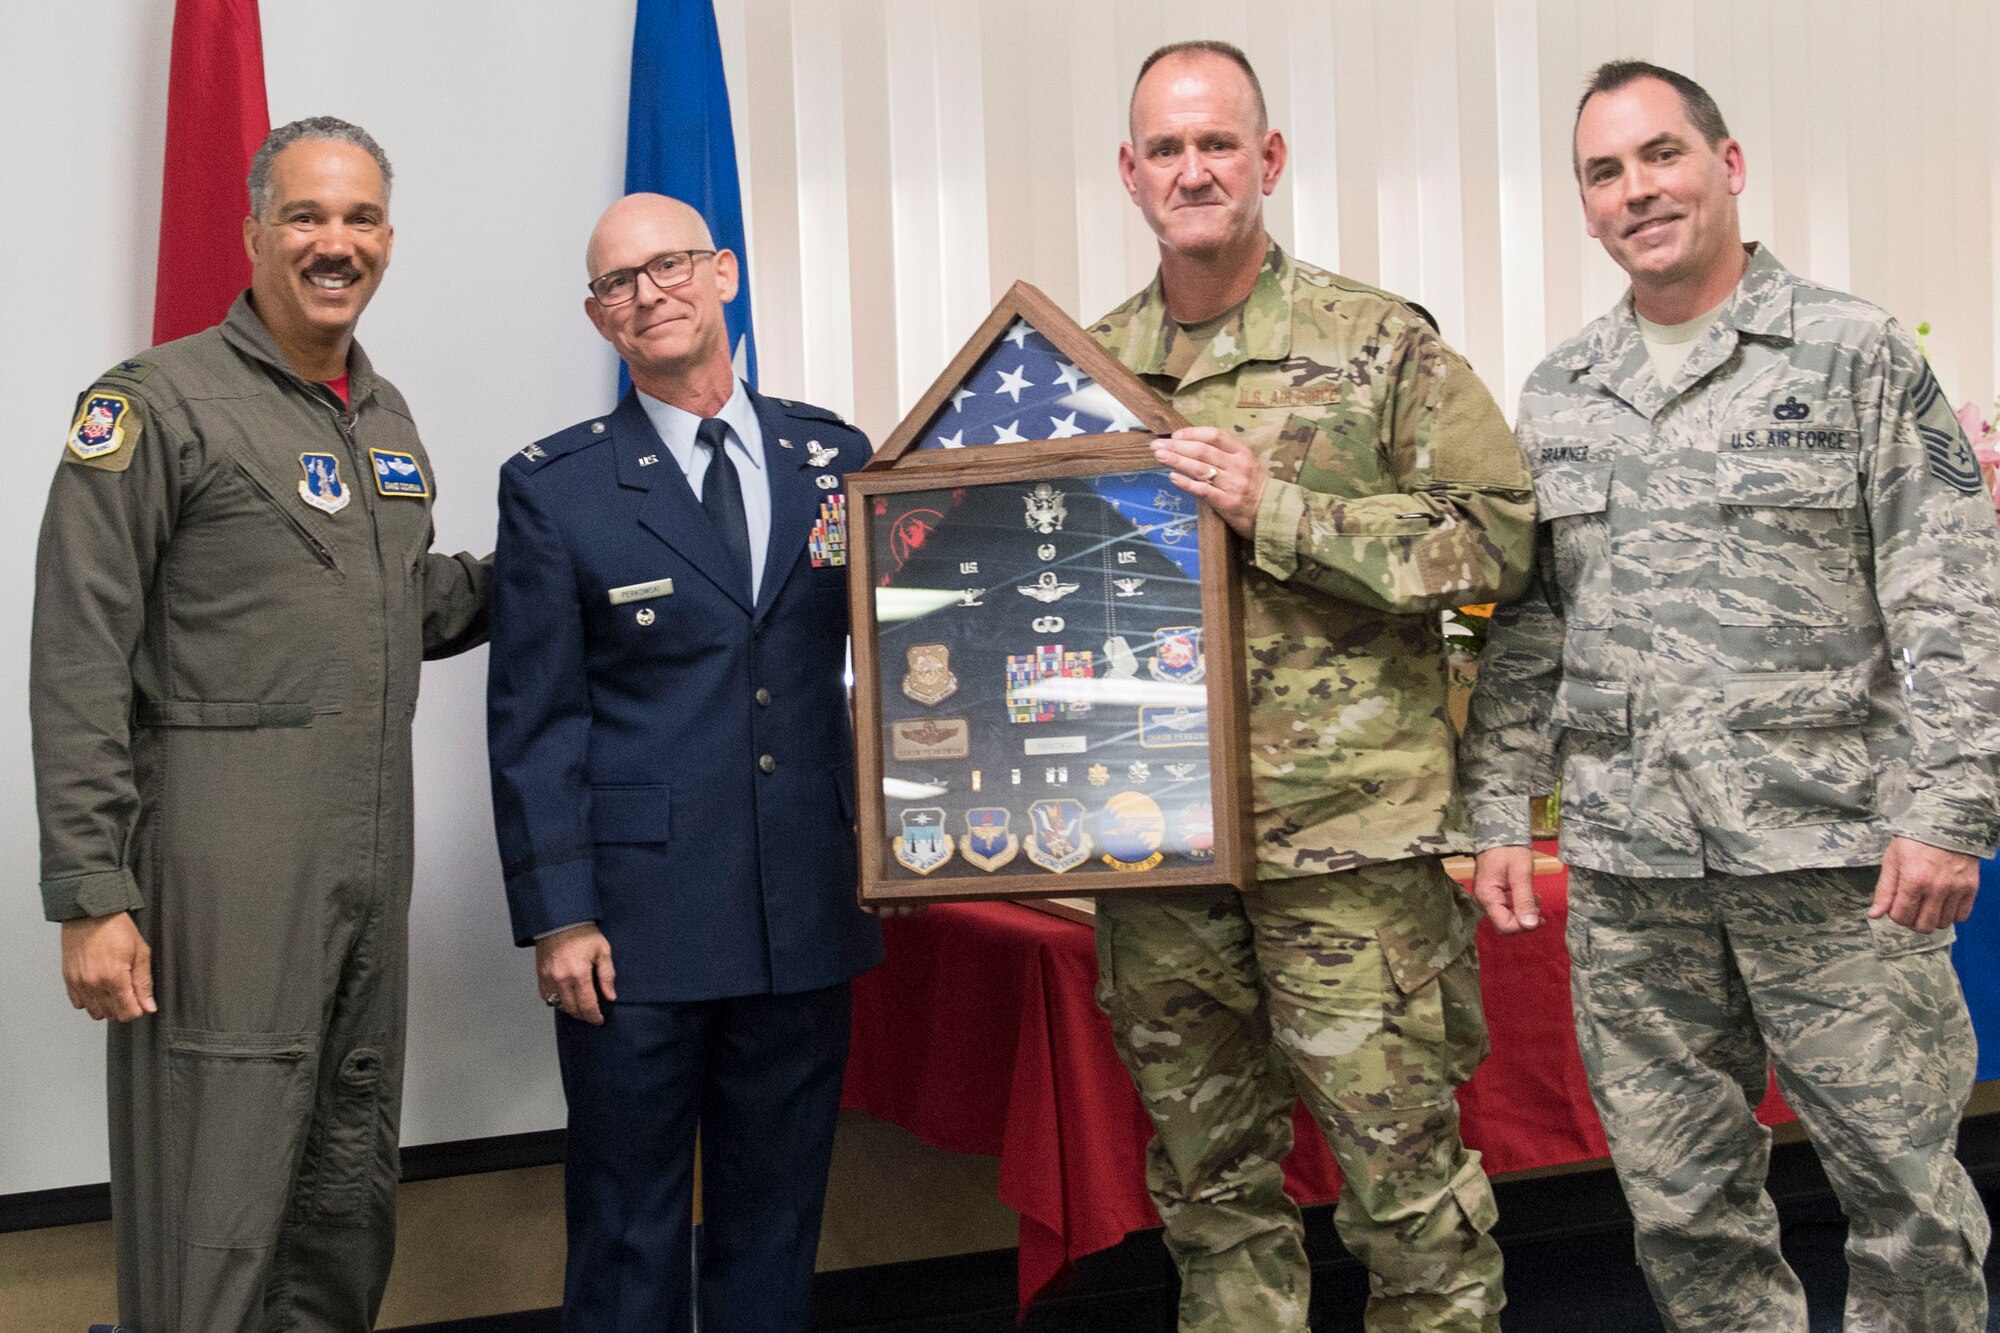 Col. David Cochran, 167th Airlift Wing Commander, left, West Virginia Air National Guard Command Chief Master Sgt. David Stevens, second from right, and 167th AW Command Chief Troy Brawner, right, presented Col. Shaun Perkowski a shadow box at his retirement ceremony. Perkowski was the 167th AW commander from October 2013- October 2018. (U.S. Air National Guard photo by Tech. Sgt. Jodie Witmer)